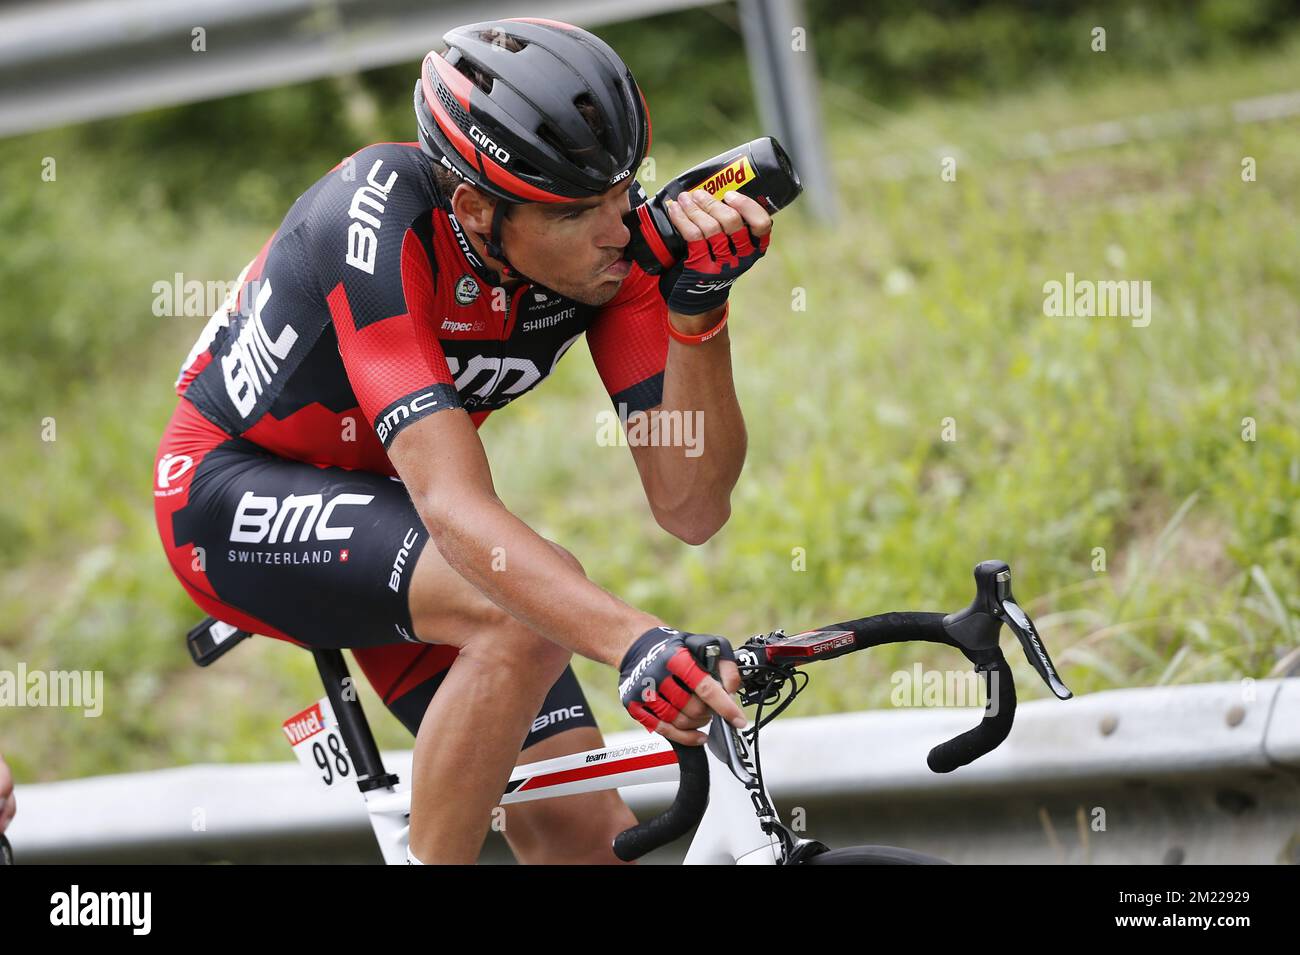 Belgian Greg Van Avermaet of BMC Racing Team pictured in action during the tenth stage of the 103rd edition of the Tour de France cycling race, 197km from Escaldes-Engordany, Andorra to Revel, France on Tuesday 12 July 2016.  Stock Photo